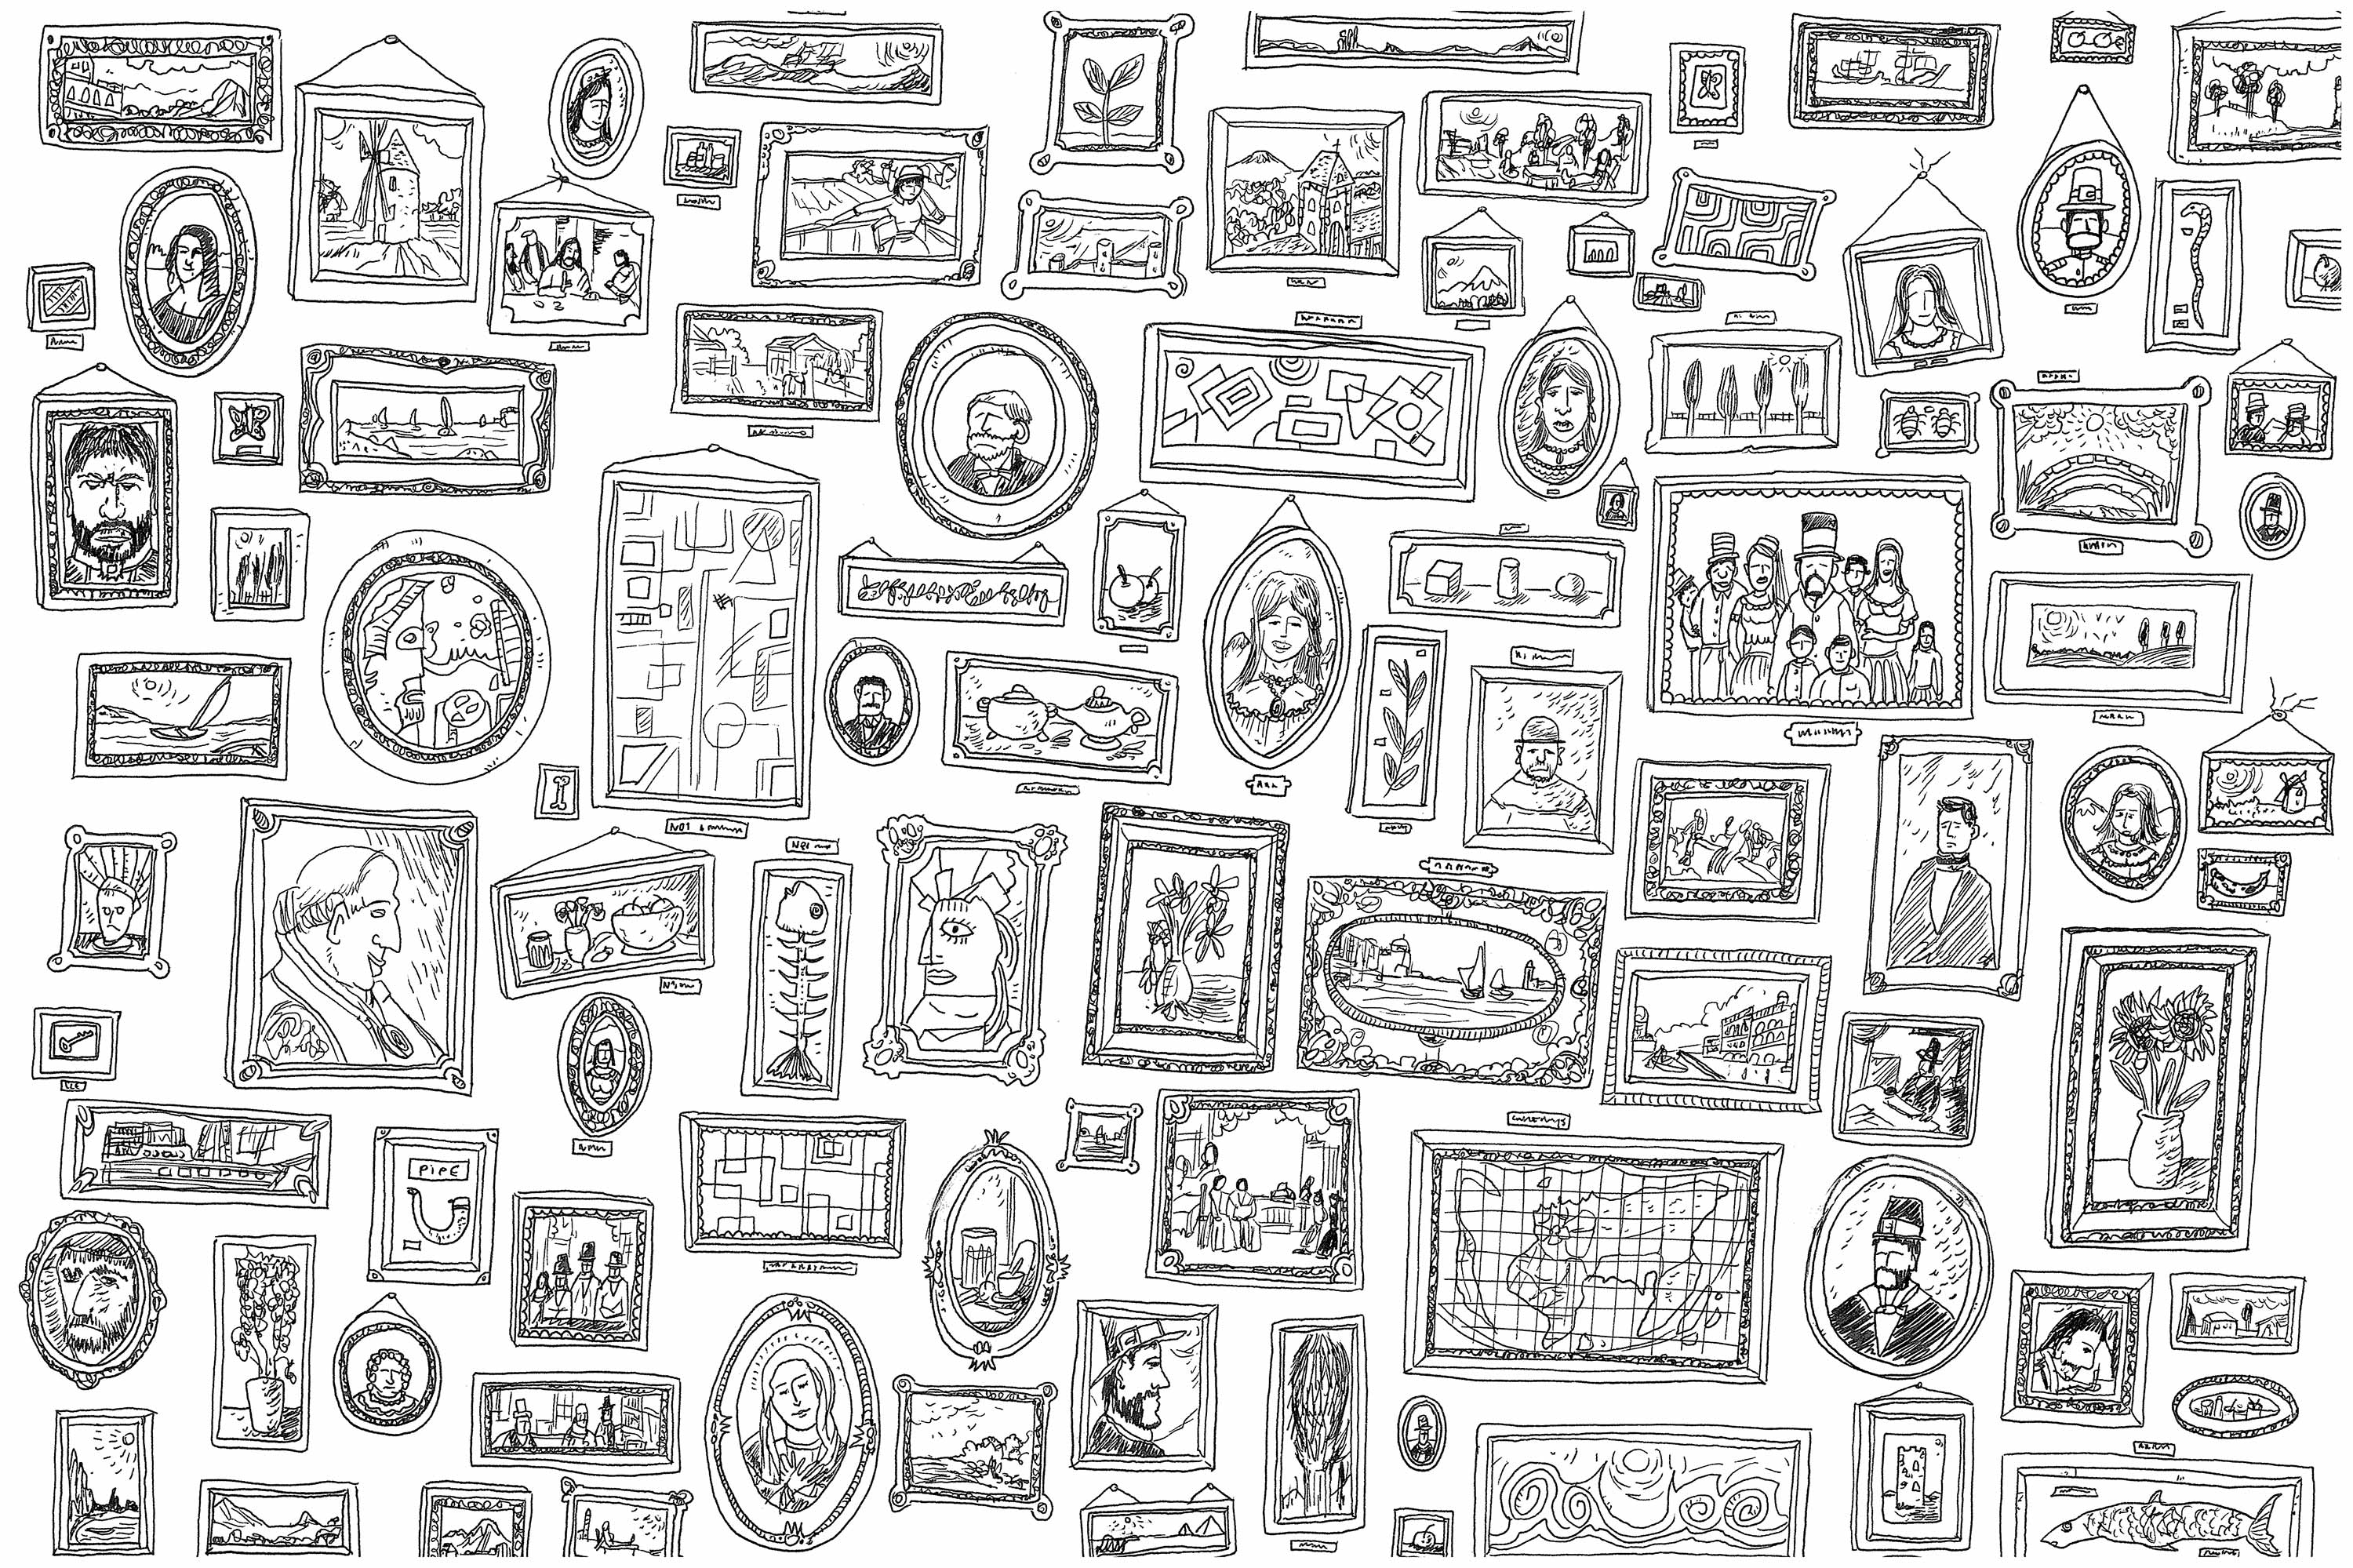 'Portraits', a complex coloring page, 'Where is Waldo ?' style